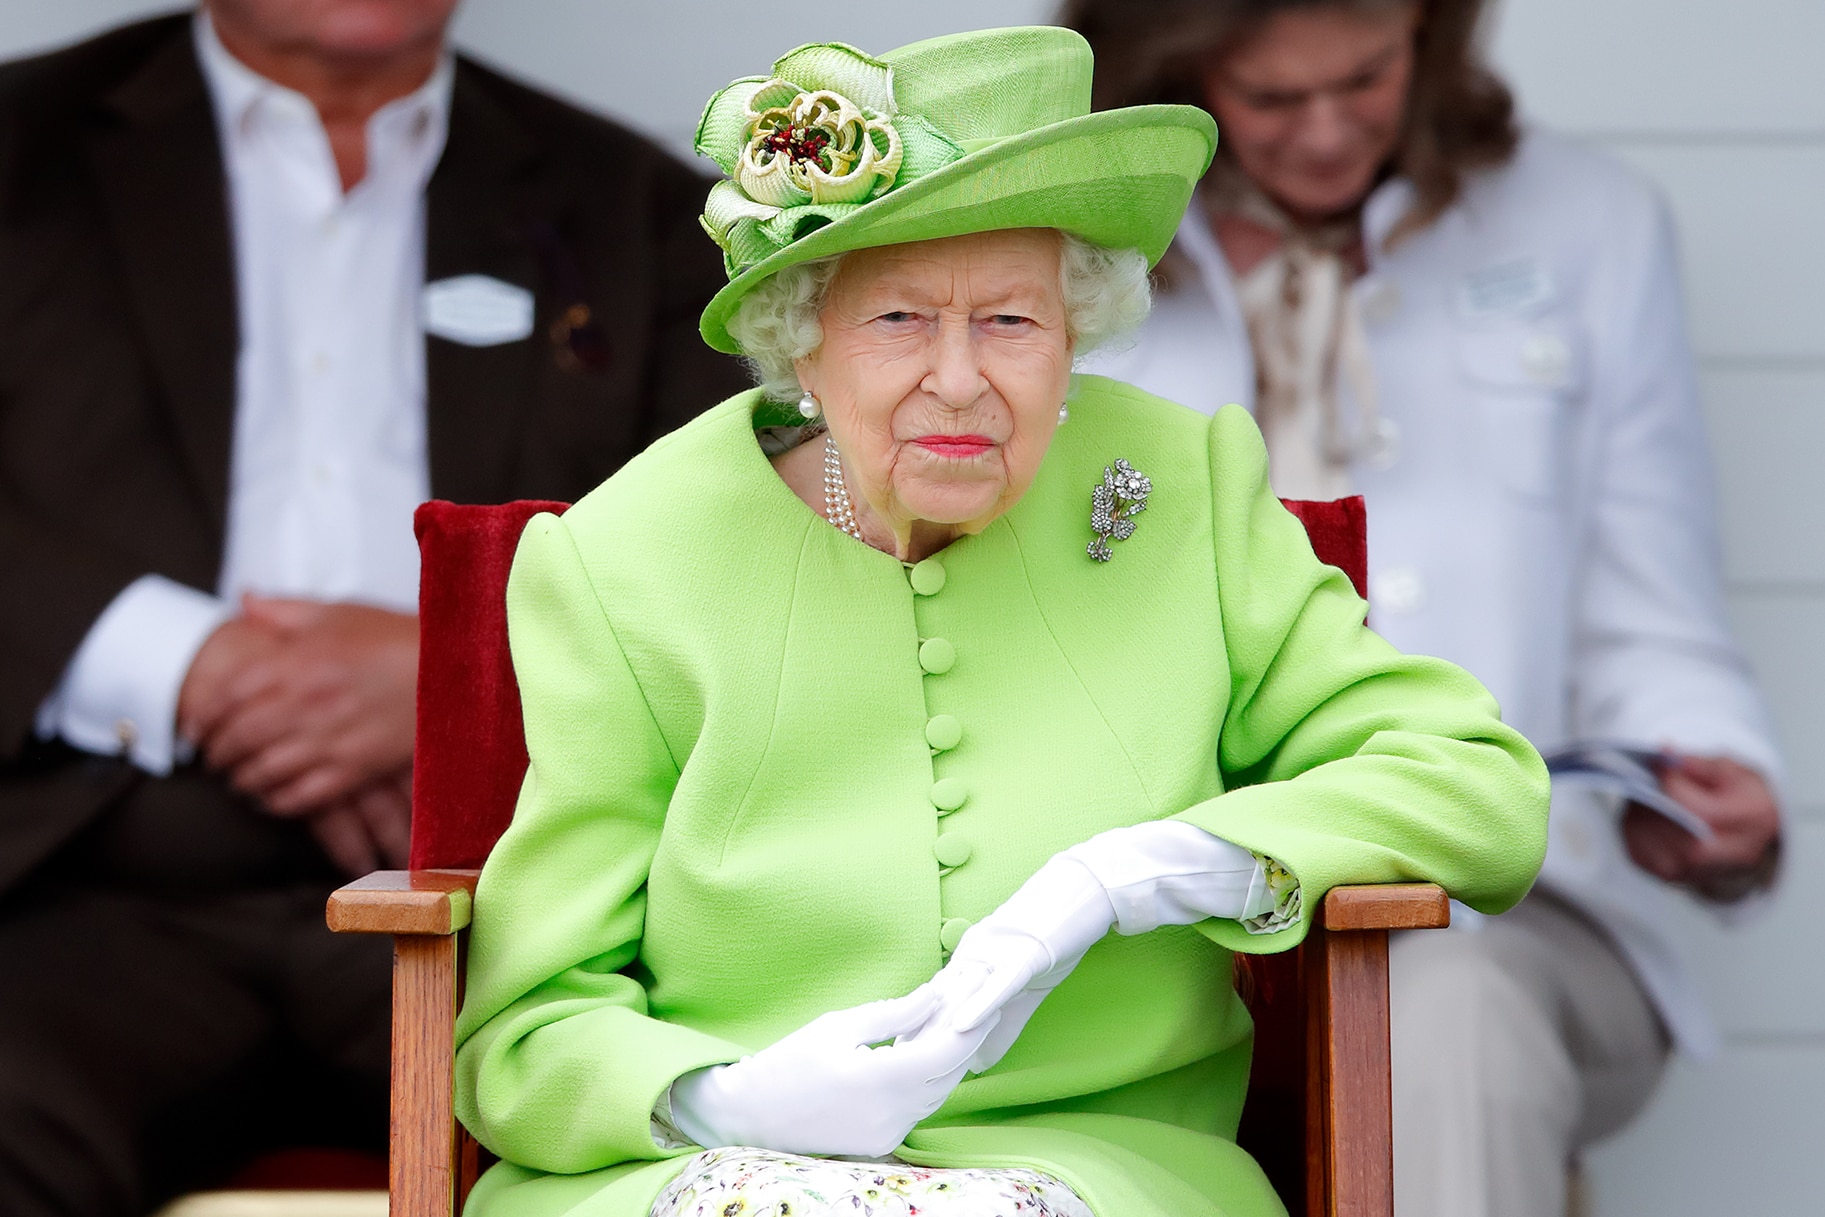 Queen Elizabeth II attends the Out-Sourcing Inc. Royal Windsor Cup polo match